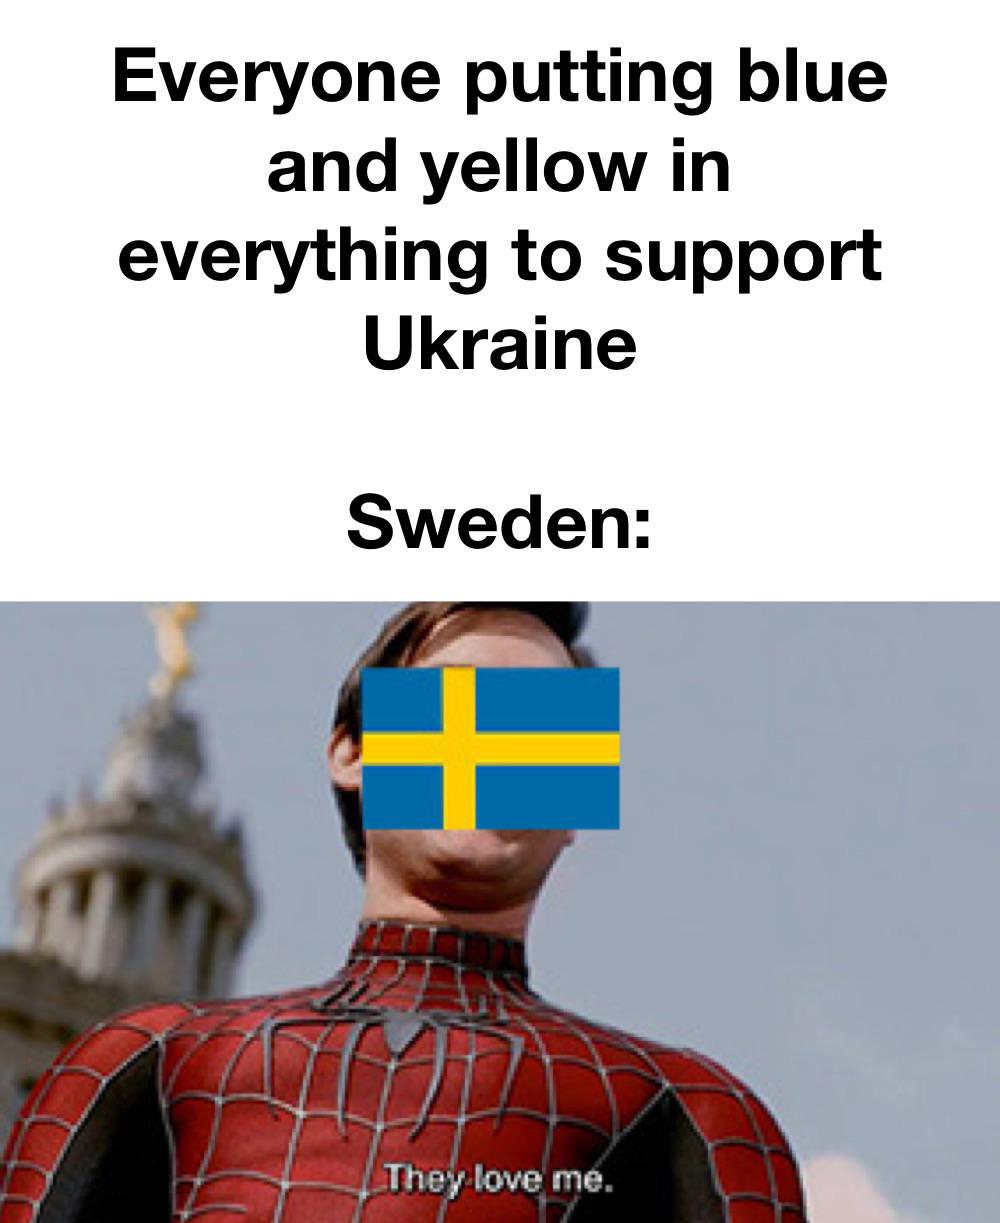 dank memes - they love me meme - Everyone putting blue and yellow in everything to support Ukraine Sweden They love me. 17